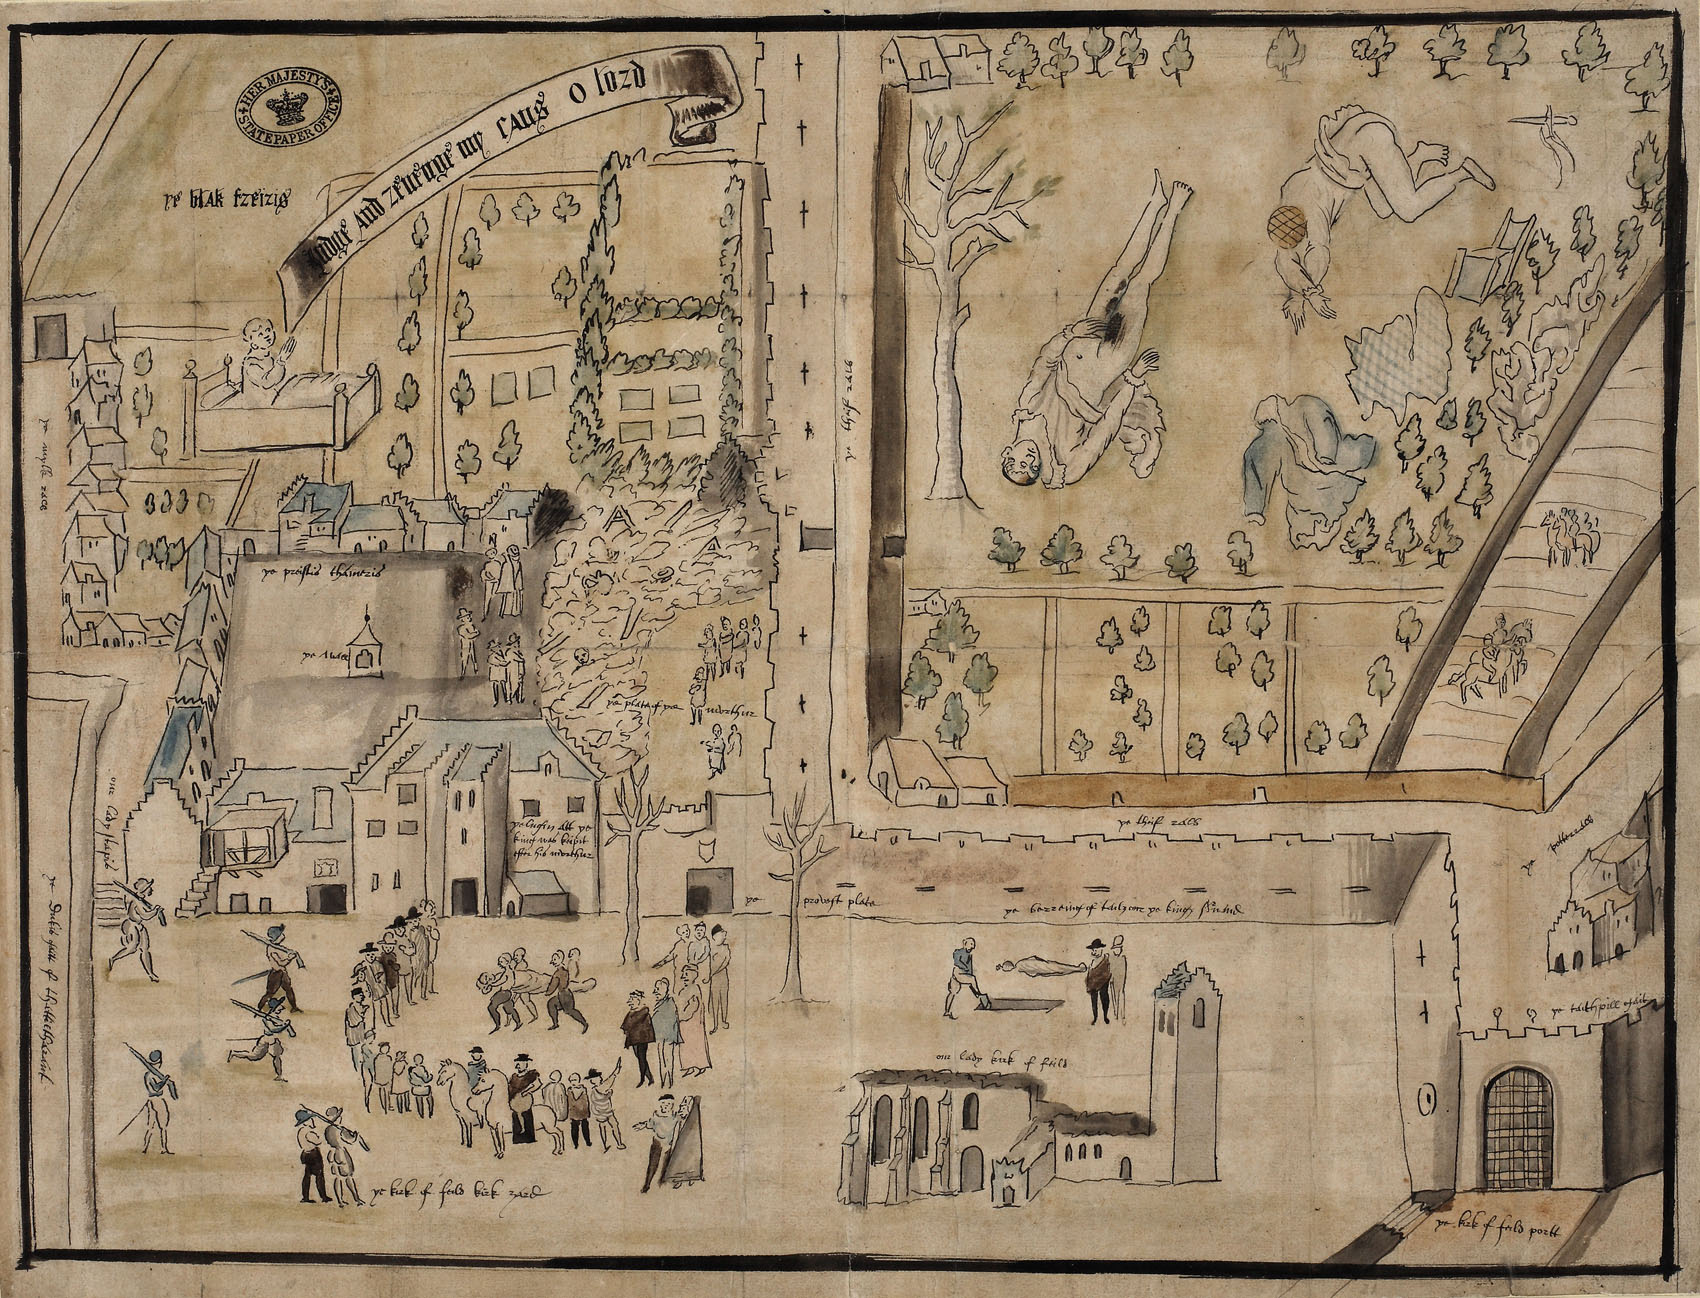 Map showing the deceased bodies of Lord Darnley and his servant in the garden, Lord Darnley being carried away and the funeral of his servant, and Lord Darnley’s son saying ‘Judge and revenge my cause, O Lord’.